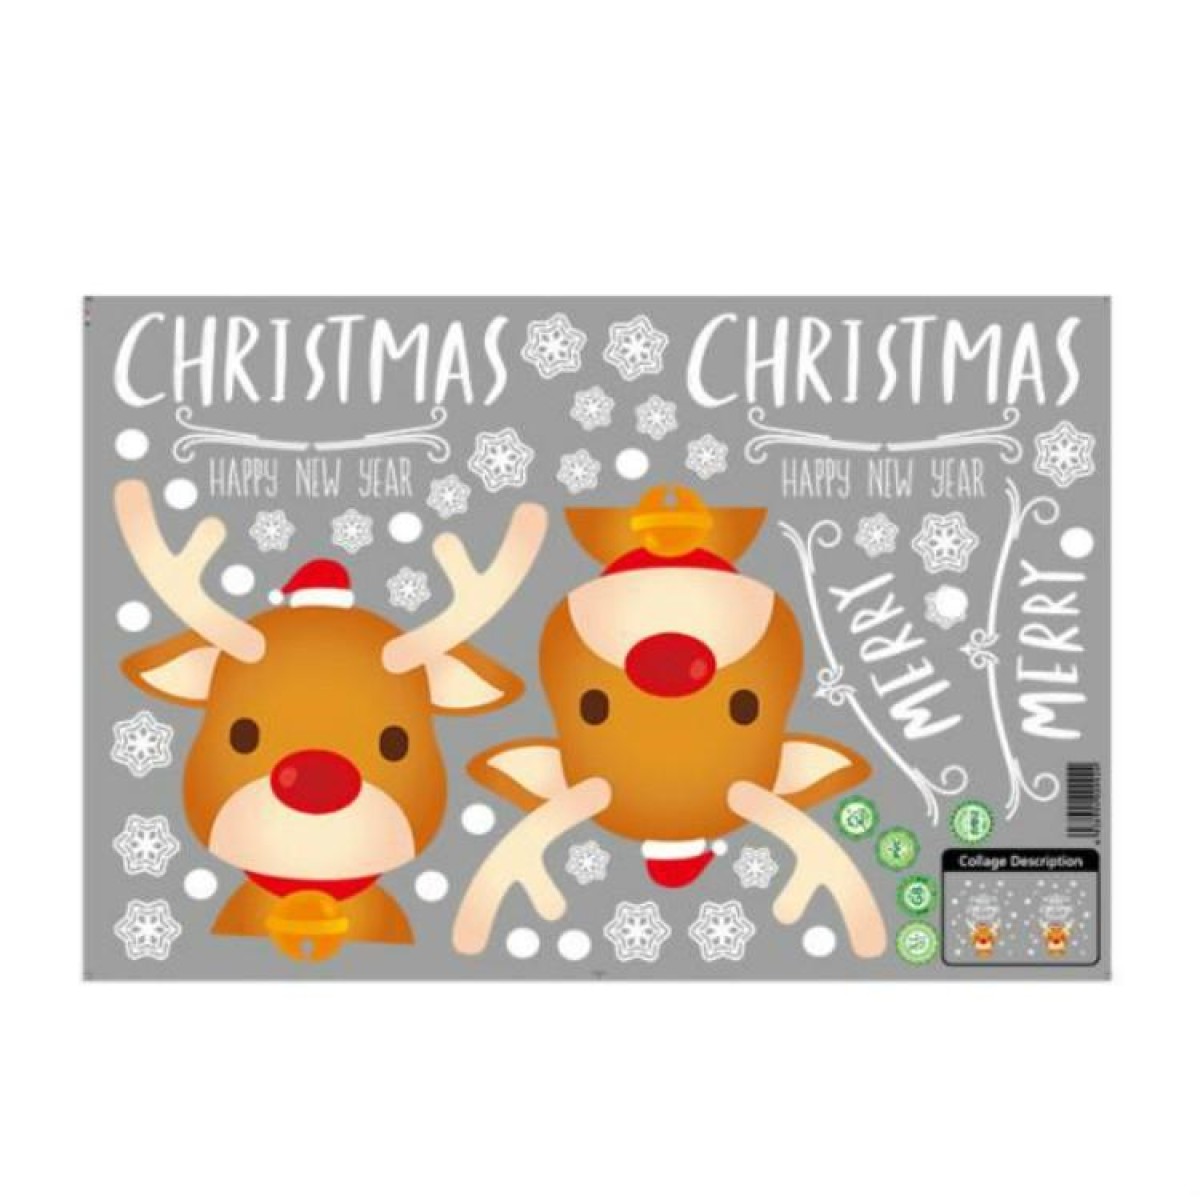 Christmas Decorations Stickers Glass Window Wall Stickers(Reindeer)